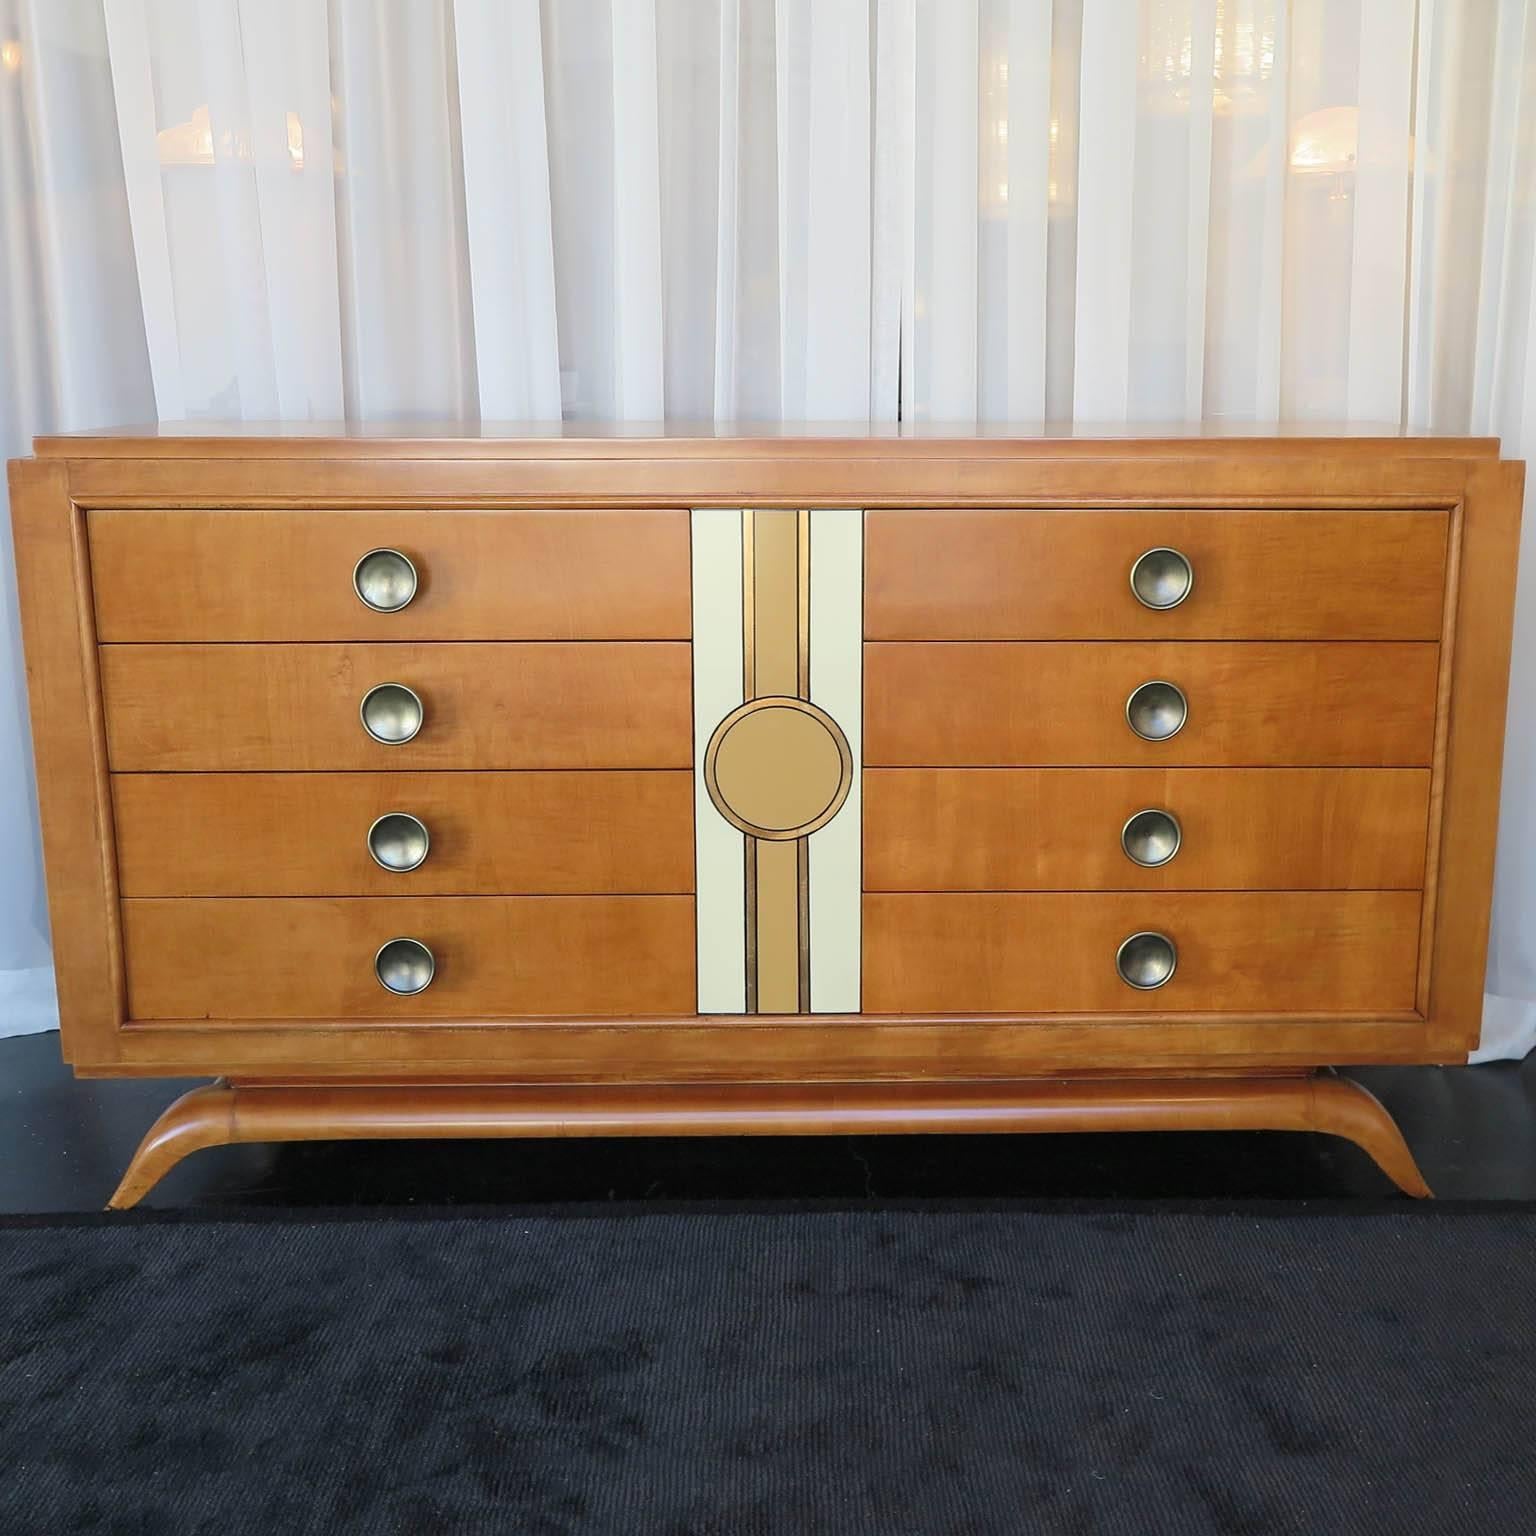 Mid-Century maple and cherrywood sideboard with matt finish. Original brass hardware on drawers with gold leaf and lacquer motif in center. This rich sideboard features eight generously sized drawers and it's streamline frame sits on a curved base